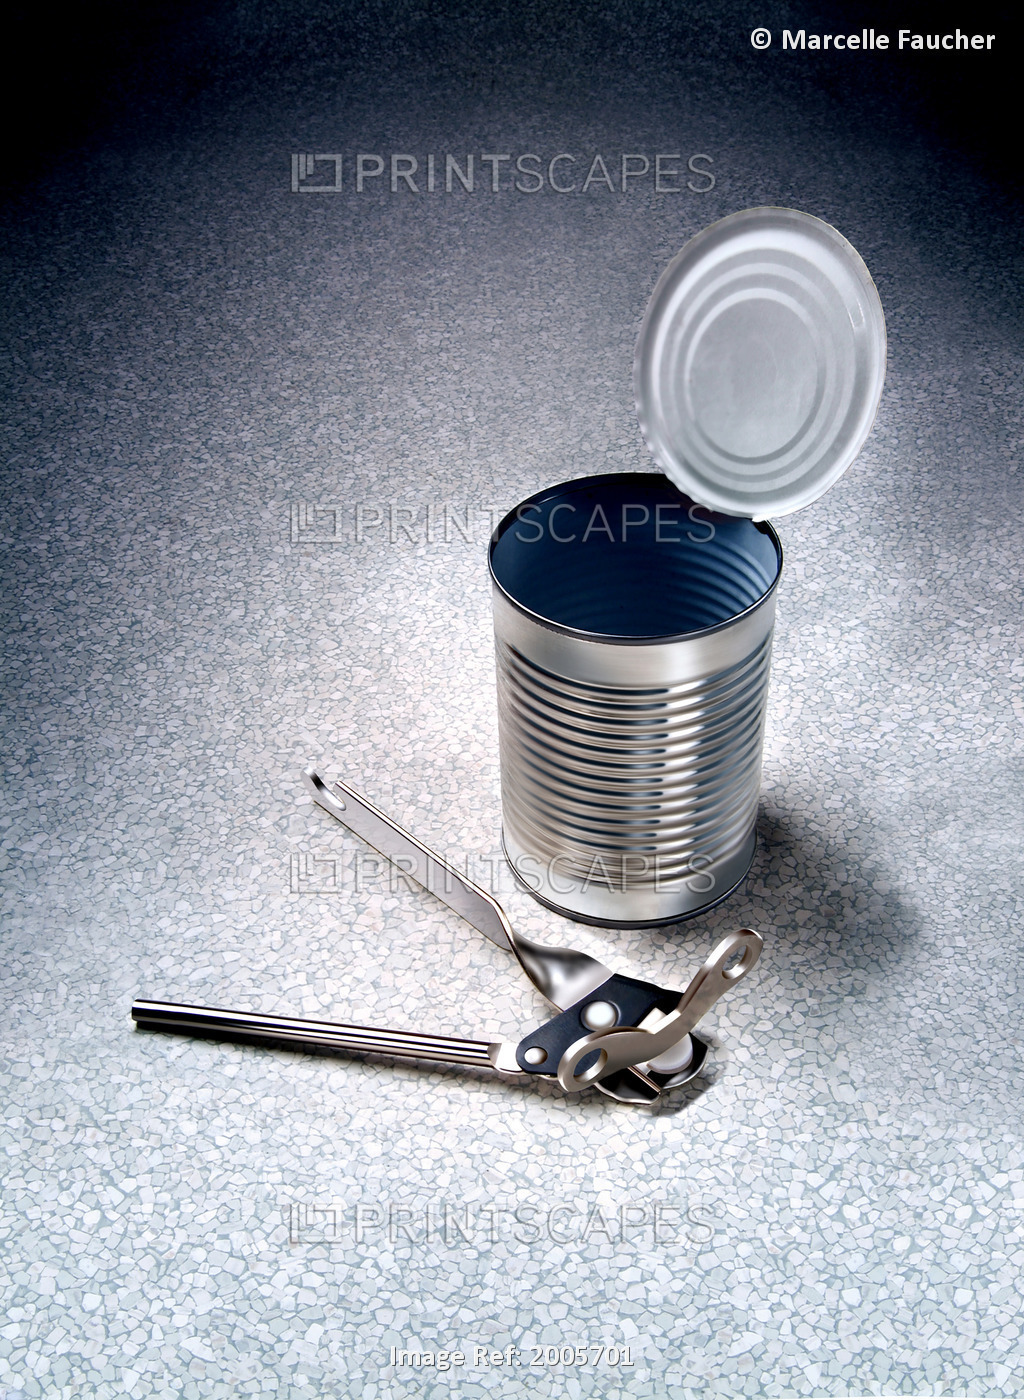 Fv5225, Marcelle Faucher; Can Opener And Opened Tin Can